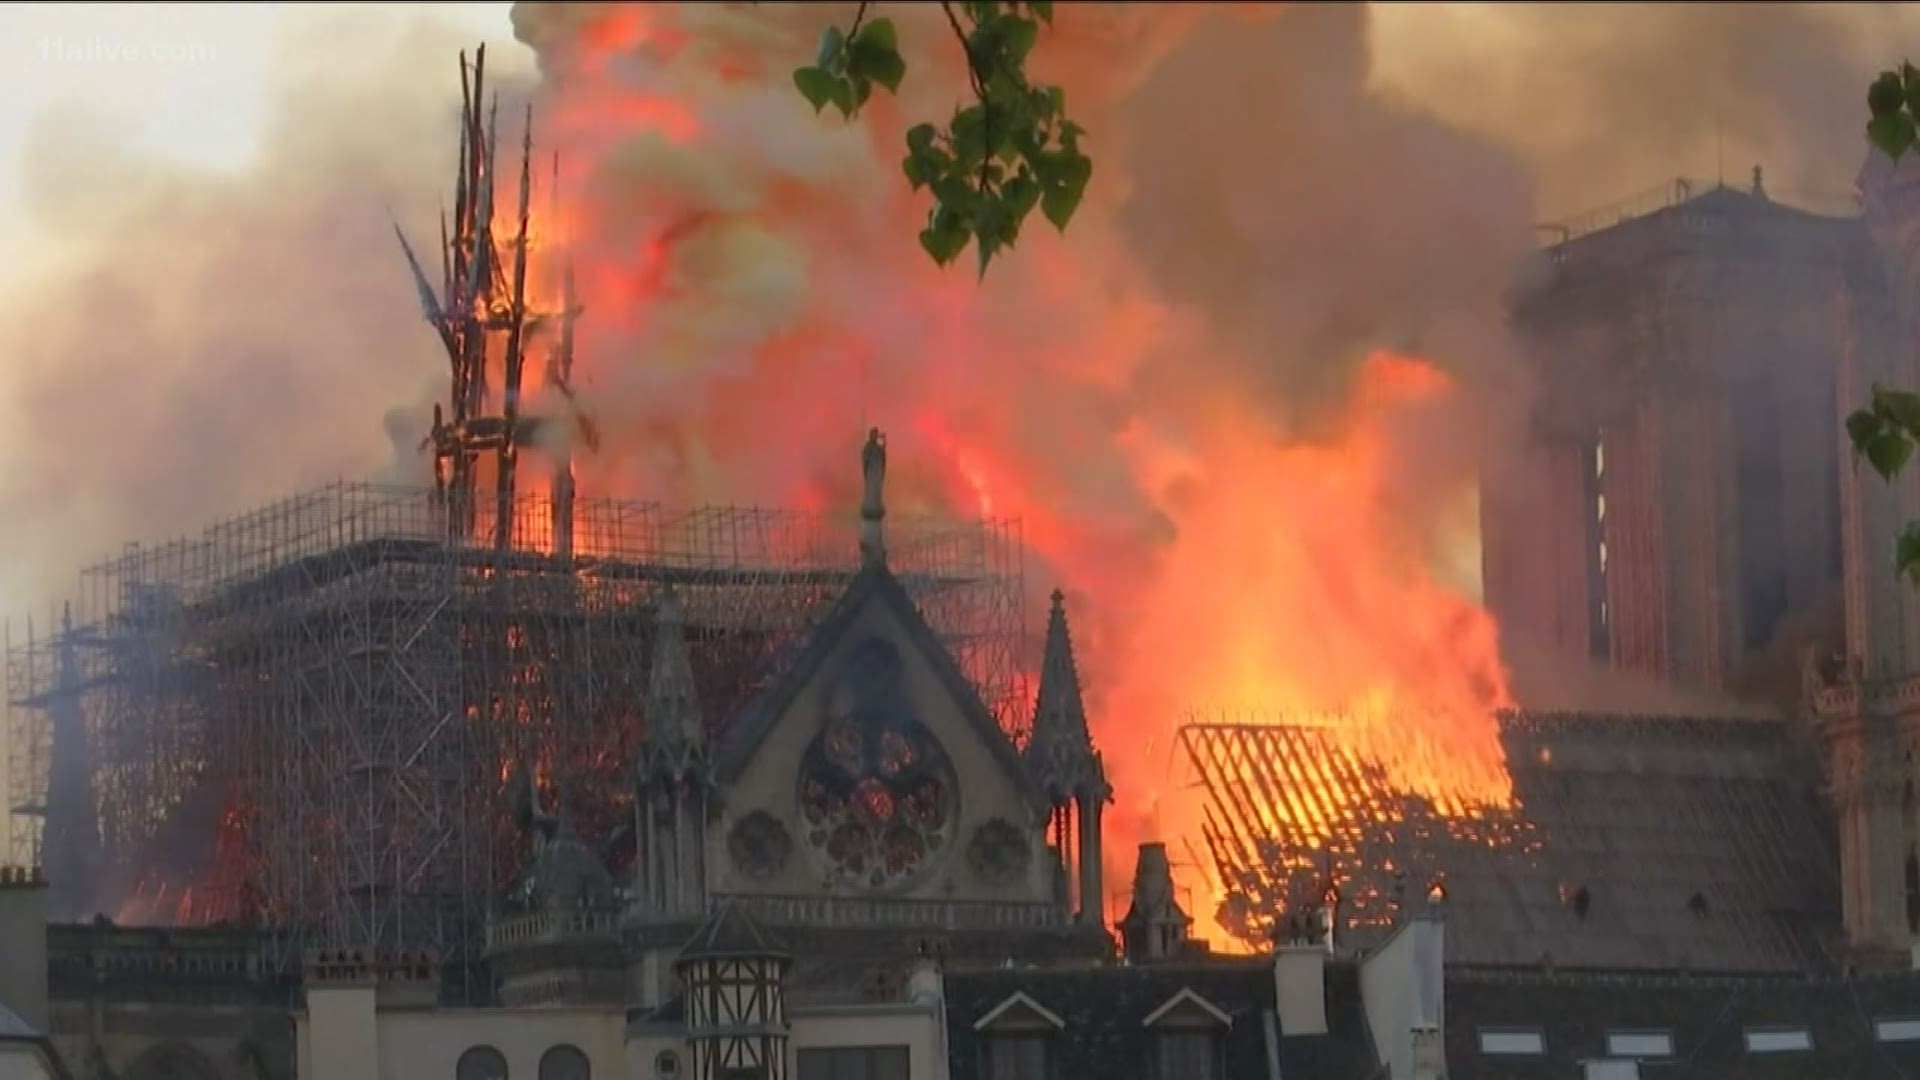 The historic cathedral suffered catastrophic damage after a fire broke out during construction.